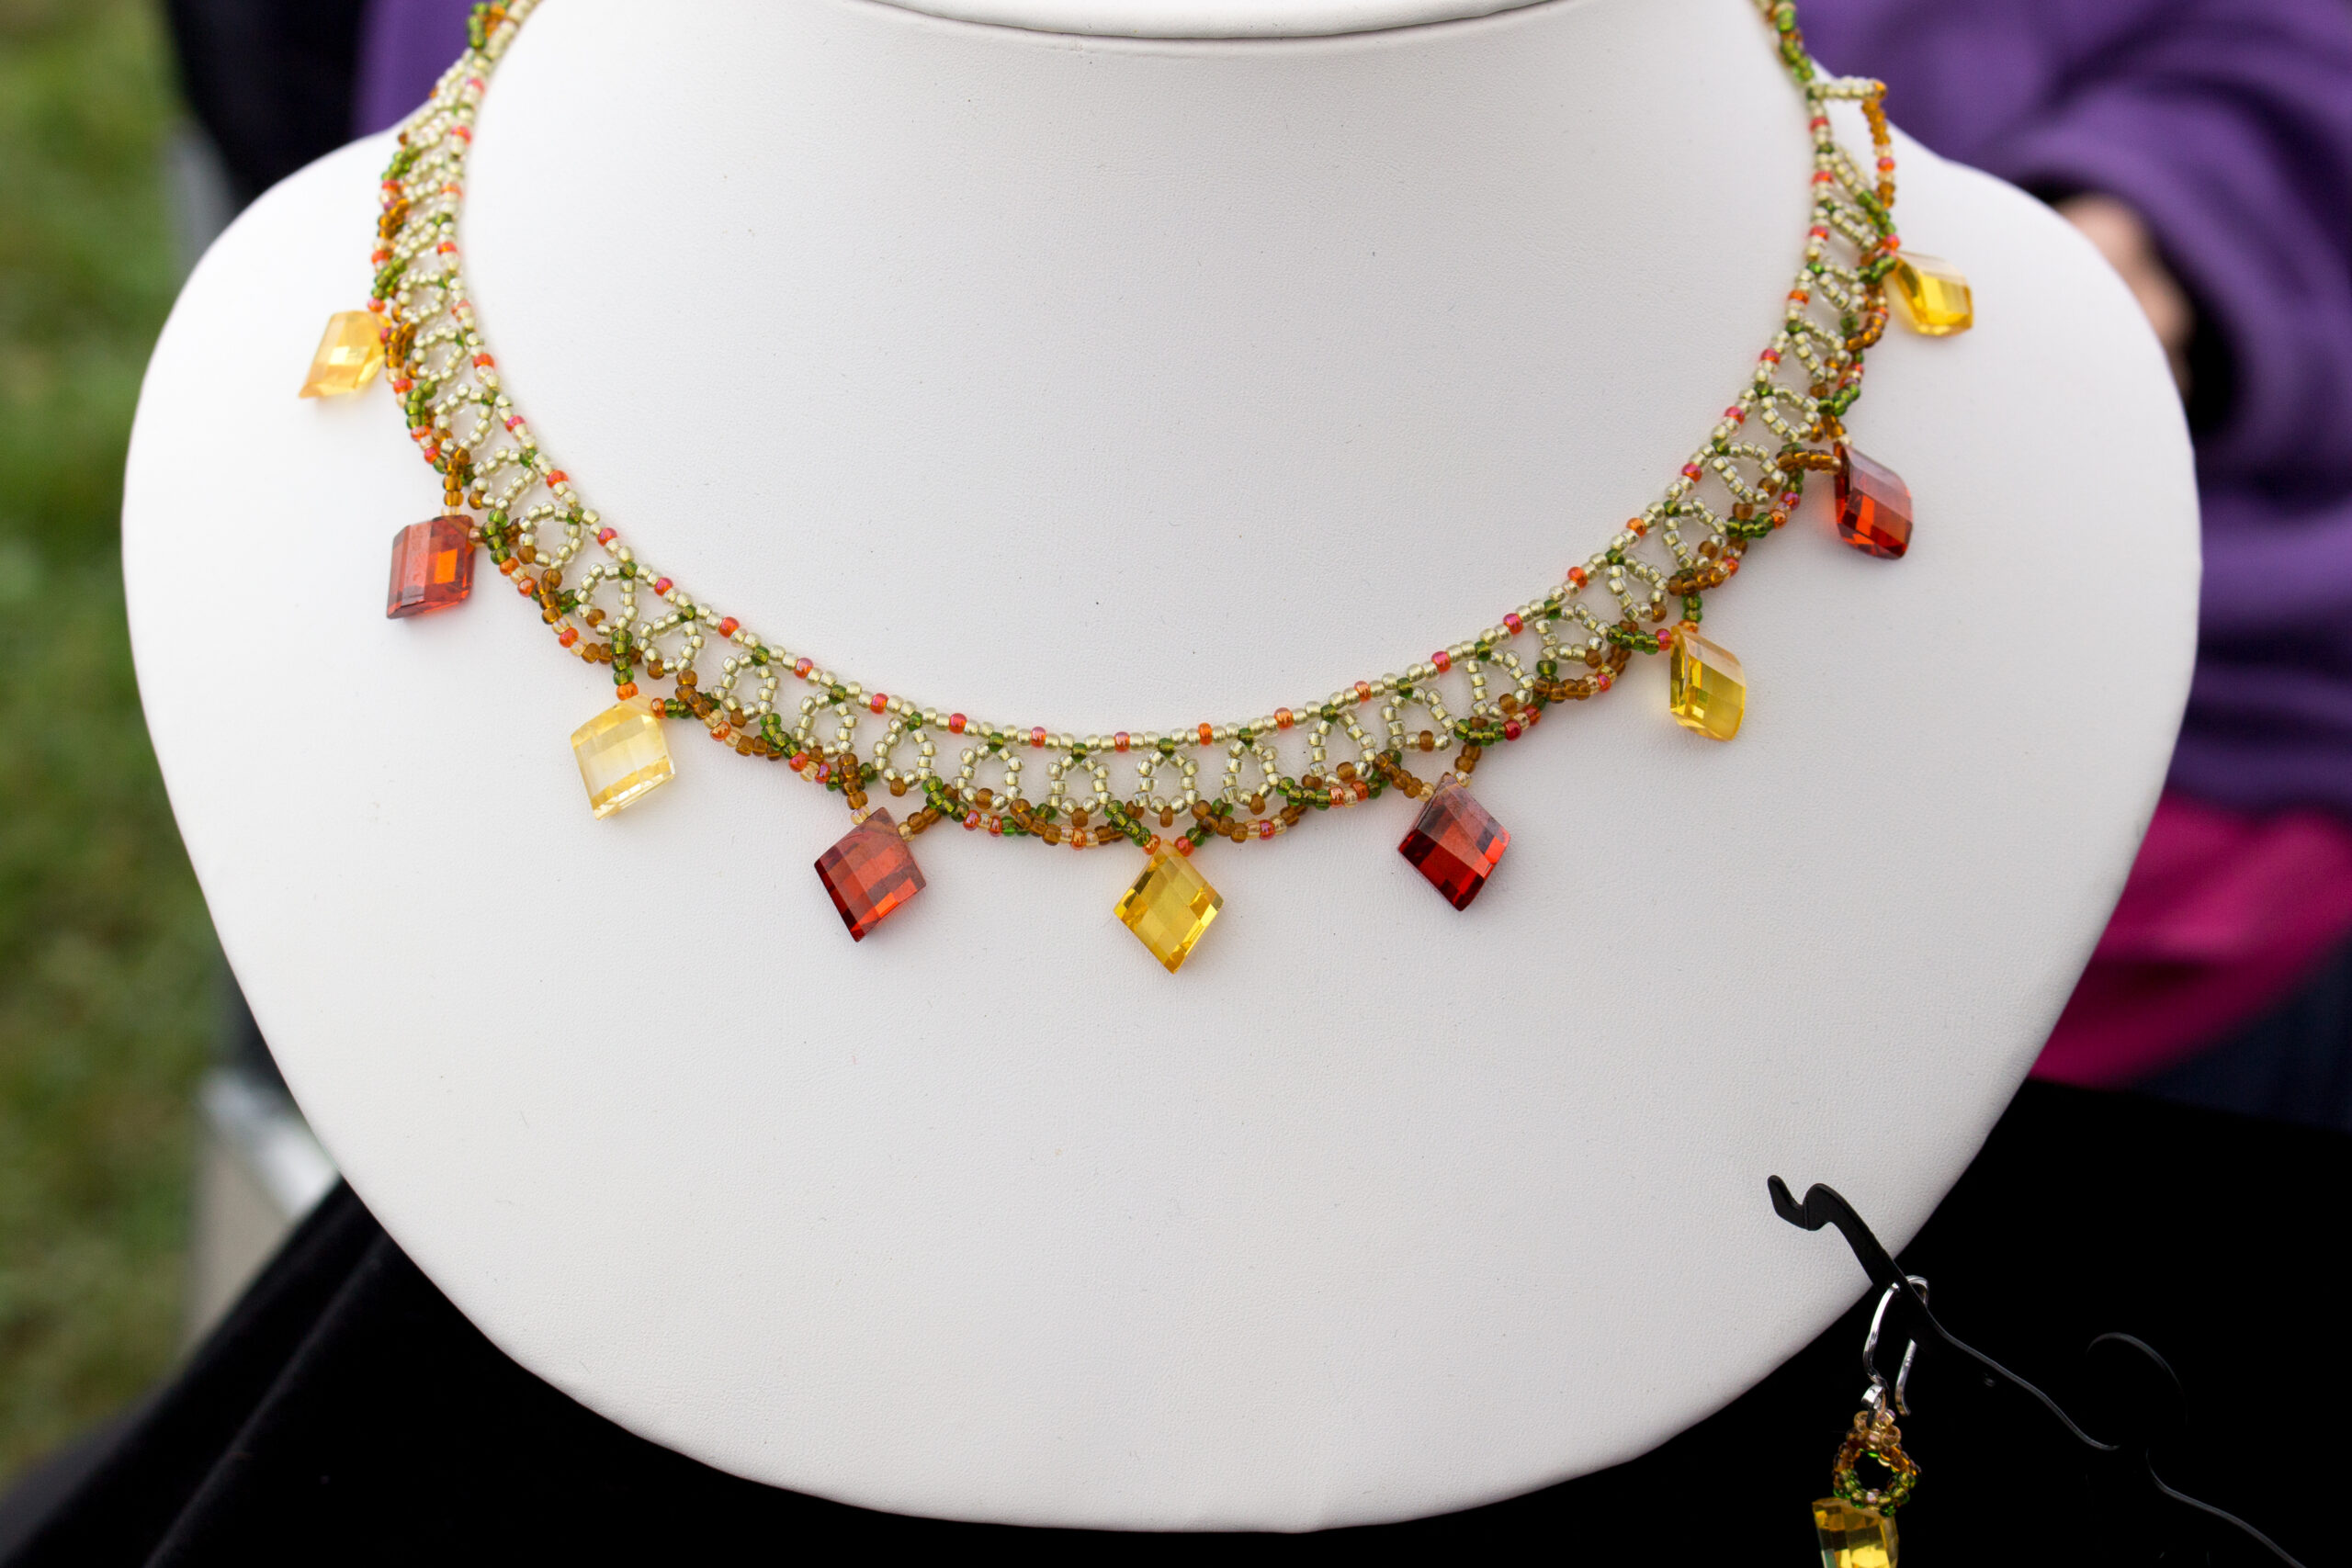 Beaded choker necklace in burnt orange and yellow, handmade by Creations With Color (Christina Miteff).